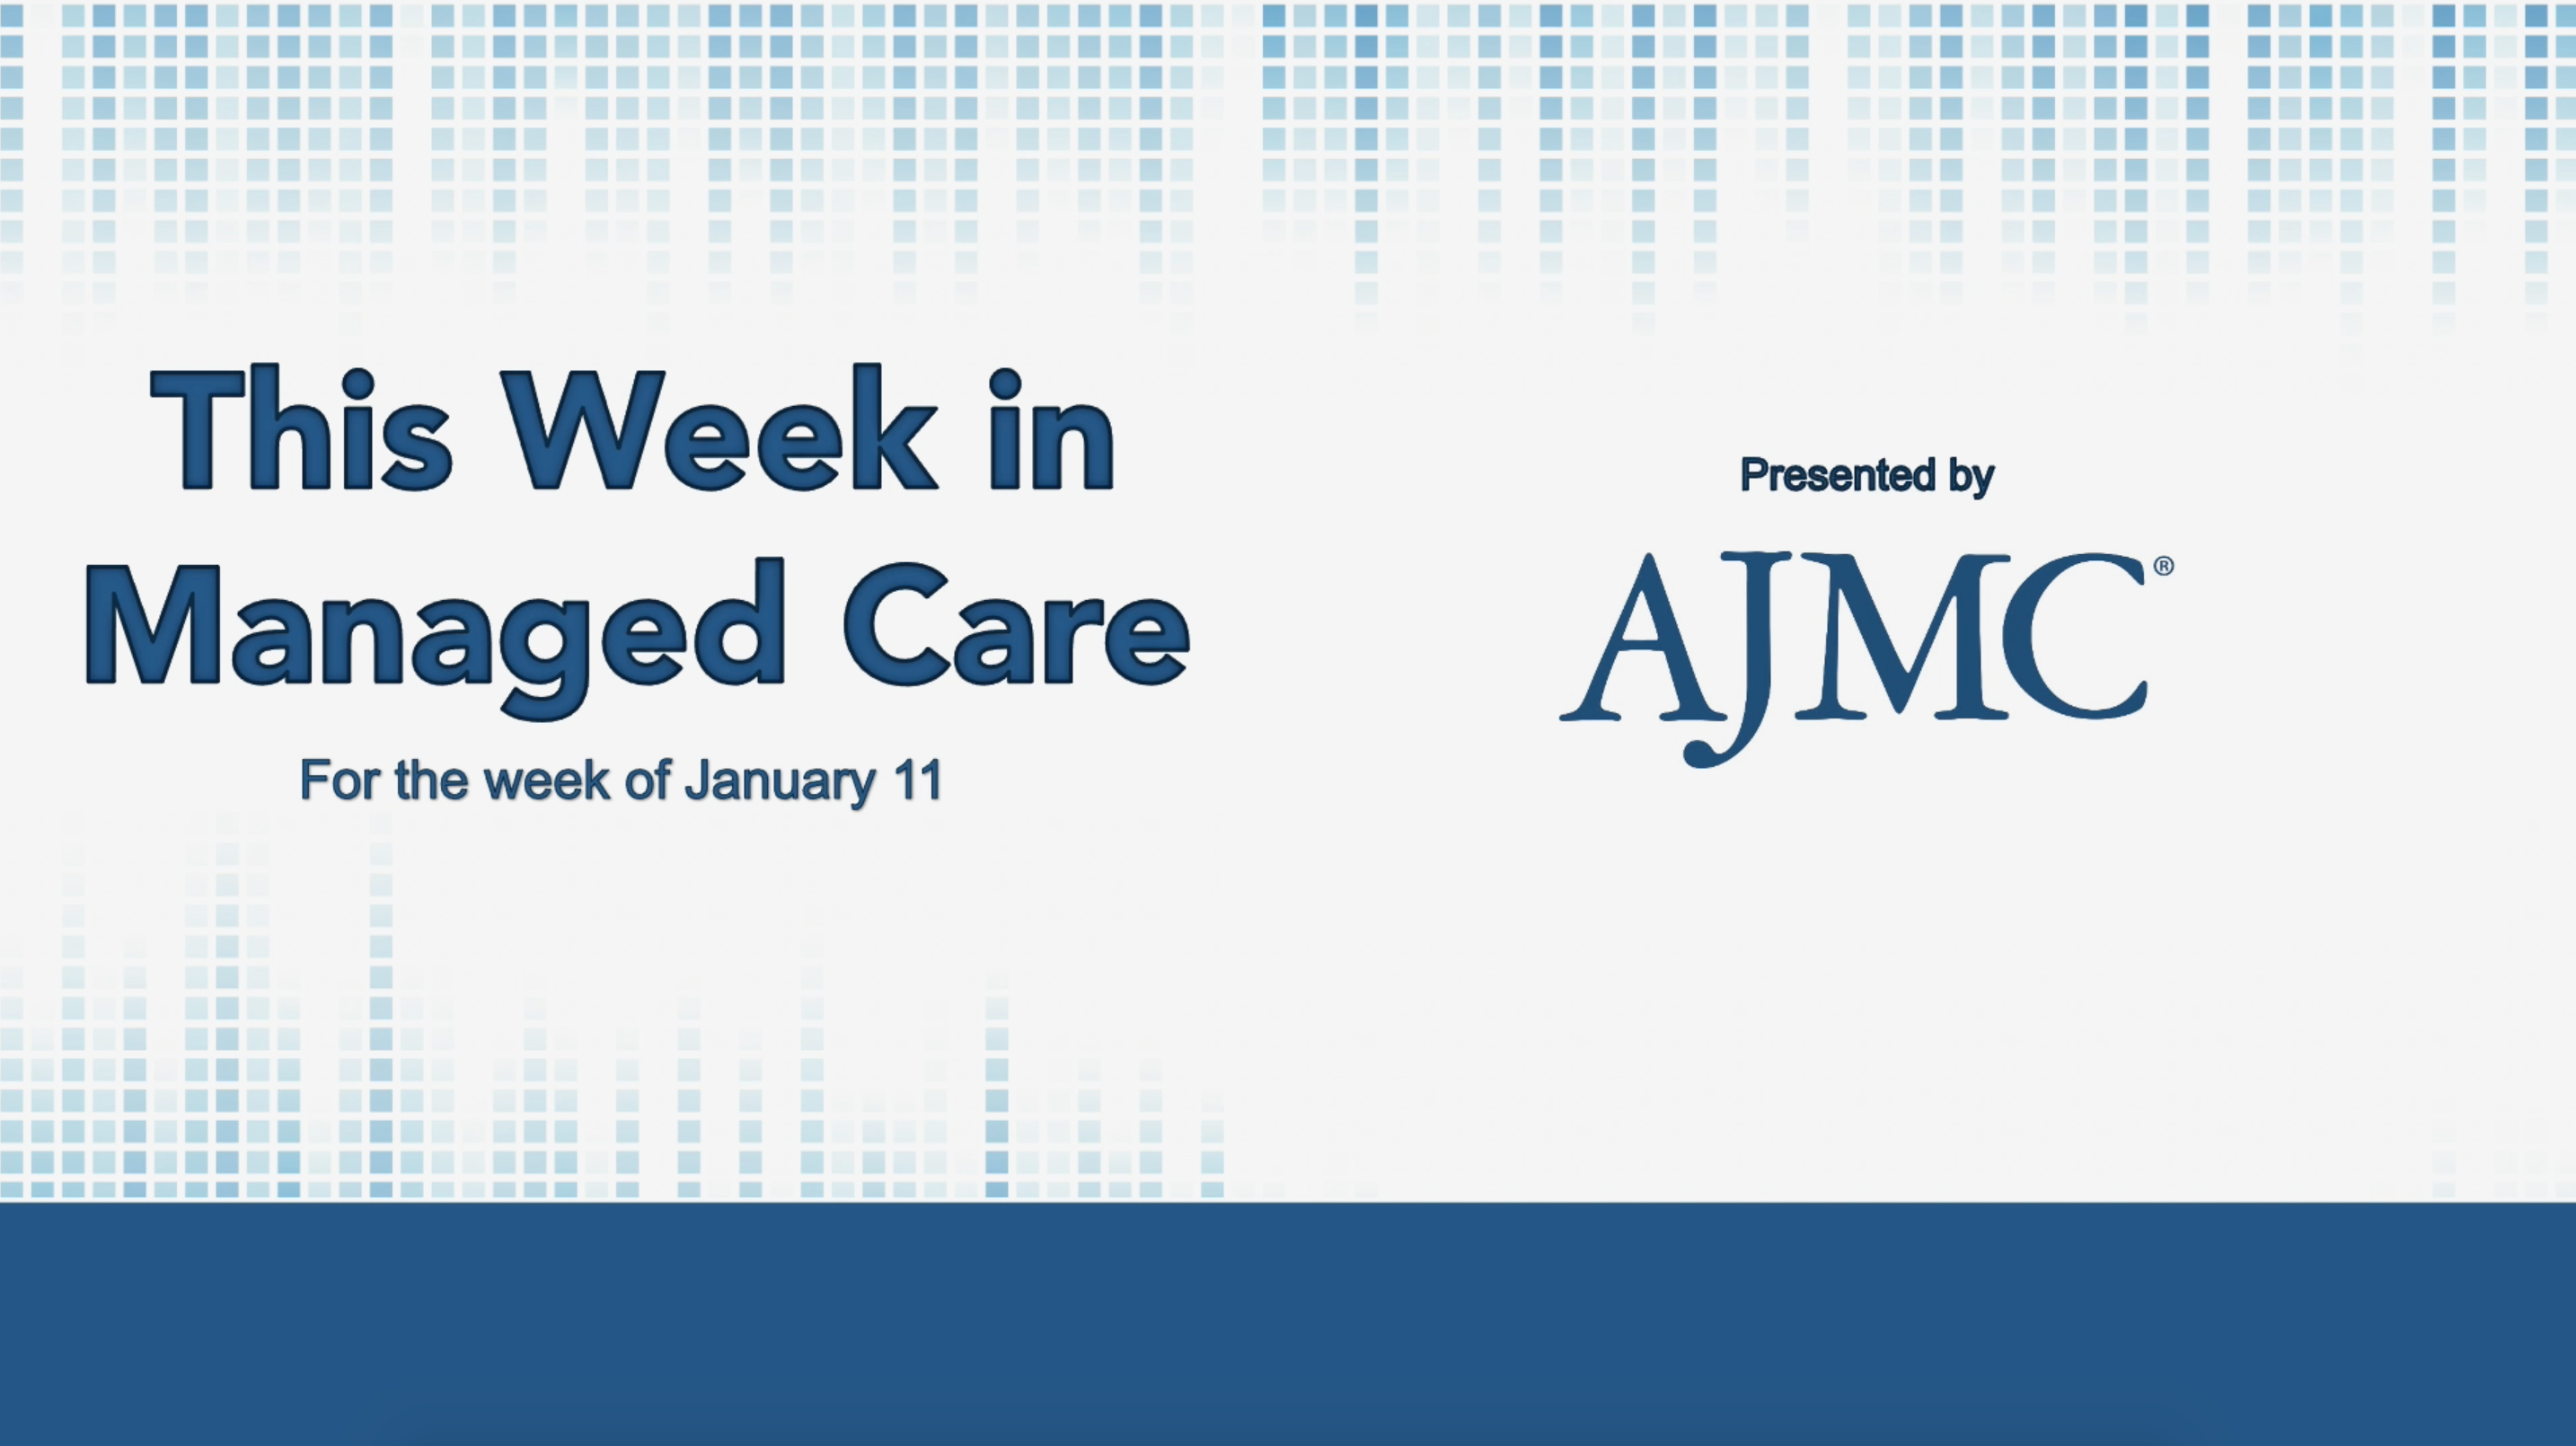 This Week in Managed Care: January 15, 2021